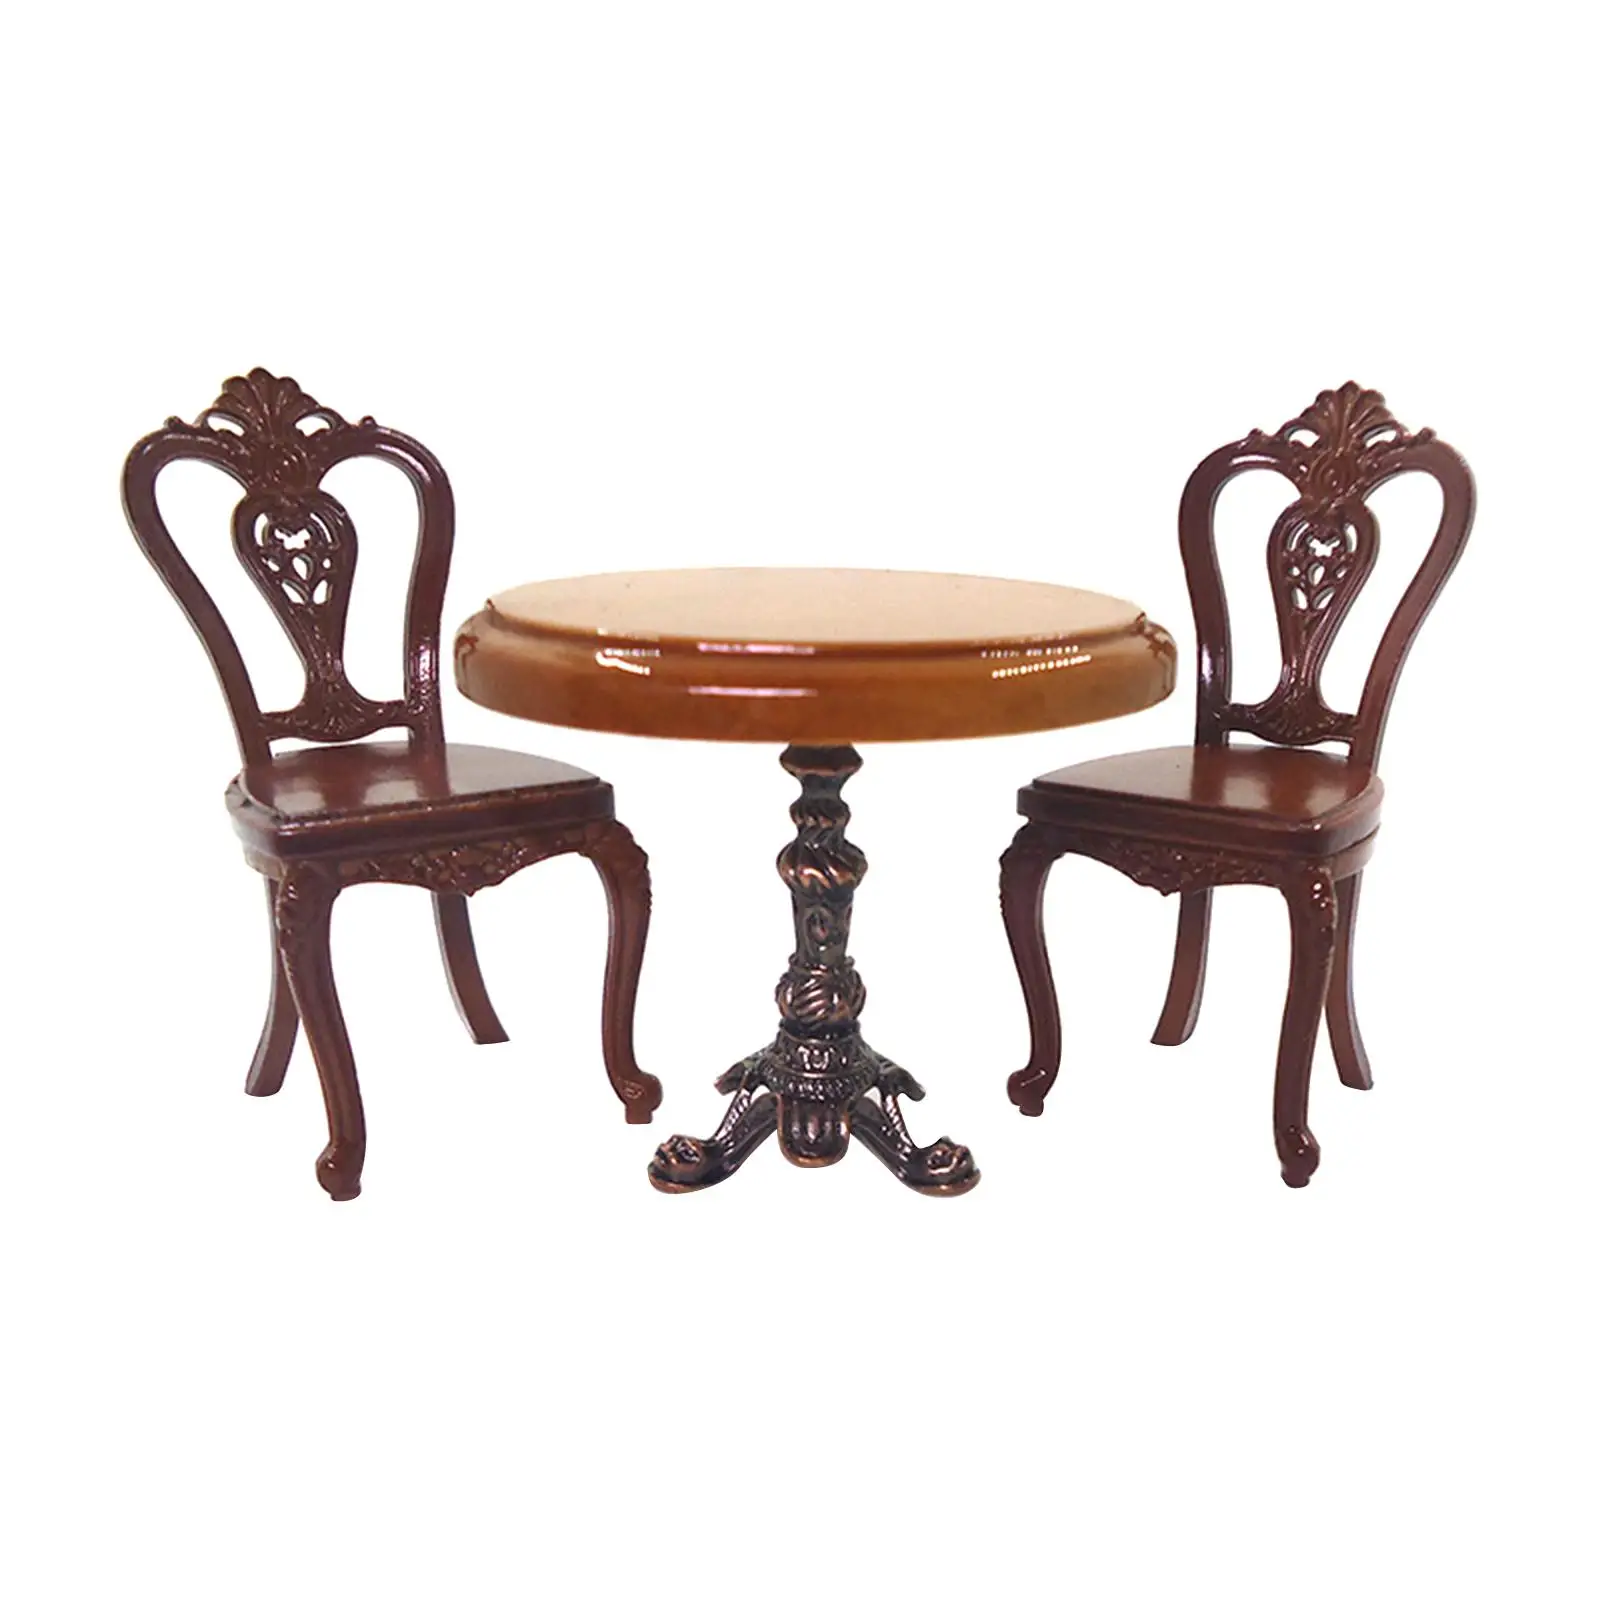 3x Wooden Round Table and Chairs Model Living Room Kitchen Home Ornaments